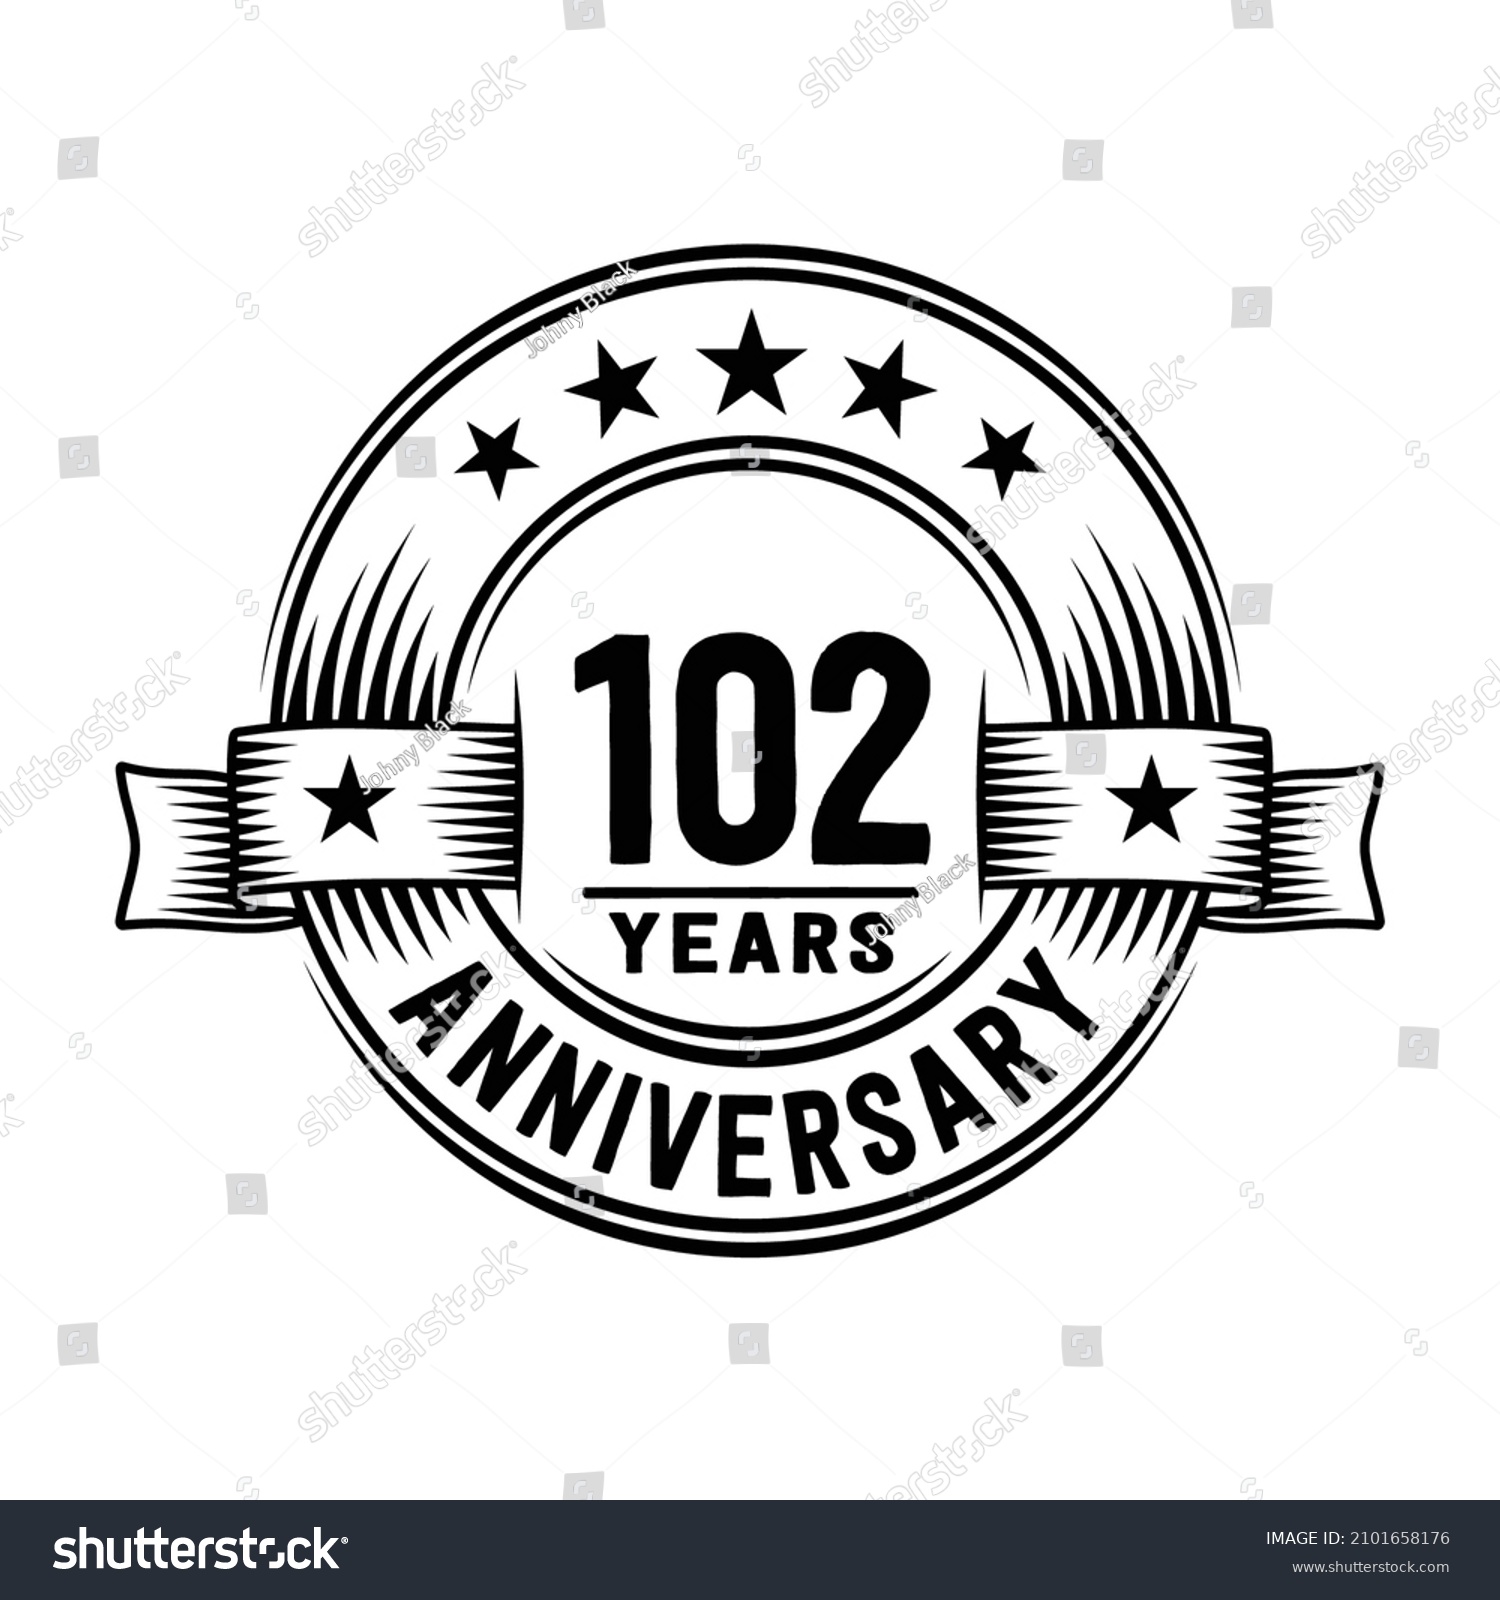 SVG of 102 years logo design template. 102nd anniversary vector and illustration. svg